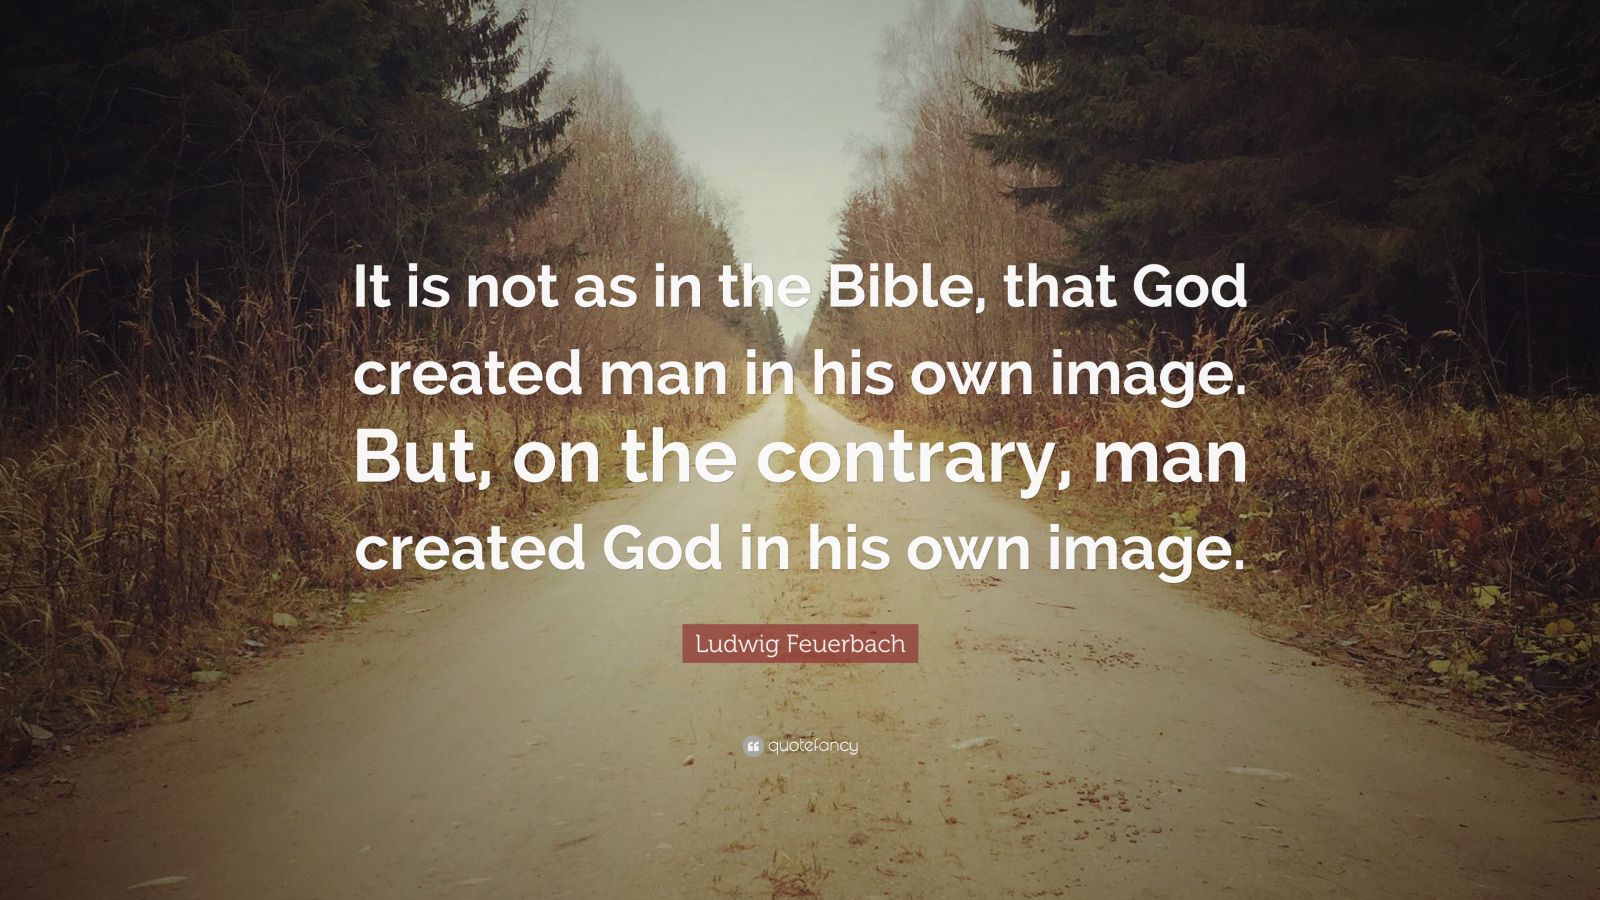 Ludwig Feuerbach Quote: “It is not as in the Bible, that God created ...